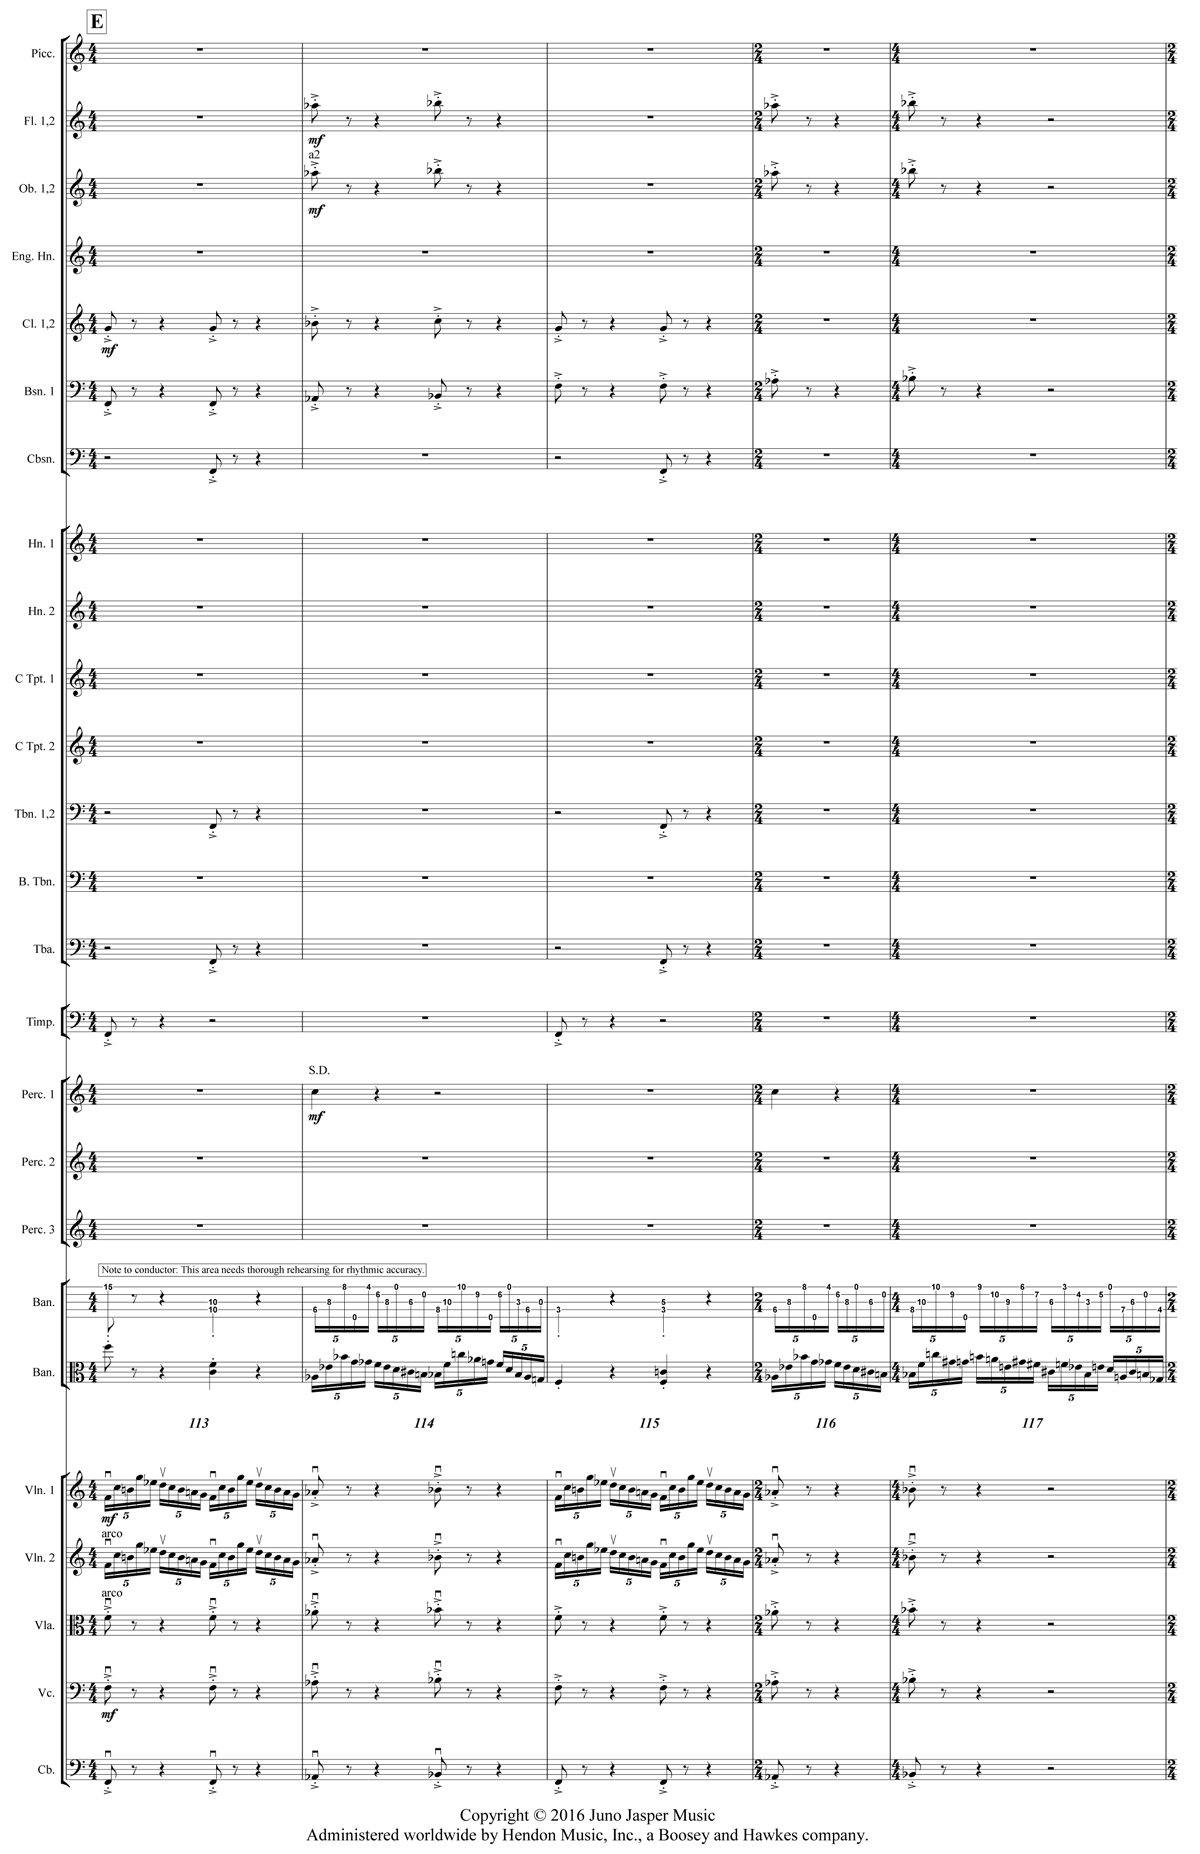 Excerpt from the full orchestral score of Béla Fleck's Juno Concerto